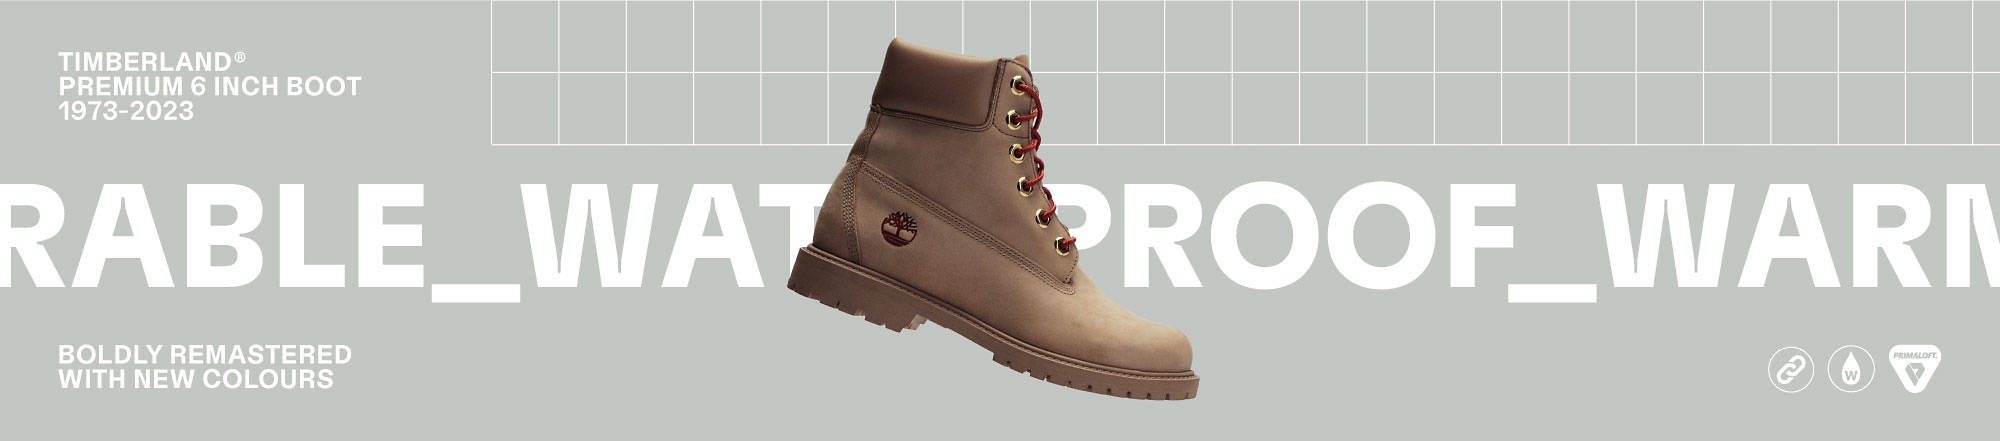 Image of a Timberland Premium 6 Inch Boot in a light gold color with gold eyelets and red laces. Text behind the boot says Timberland Premium 6 Inch Boot 1973 - 2023. Additional text reads: 'Durable', 'Waterproof', 'Warm', 'Boldly Remastered with New Colors'